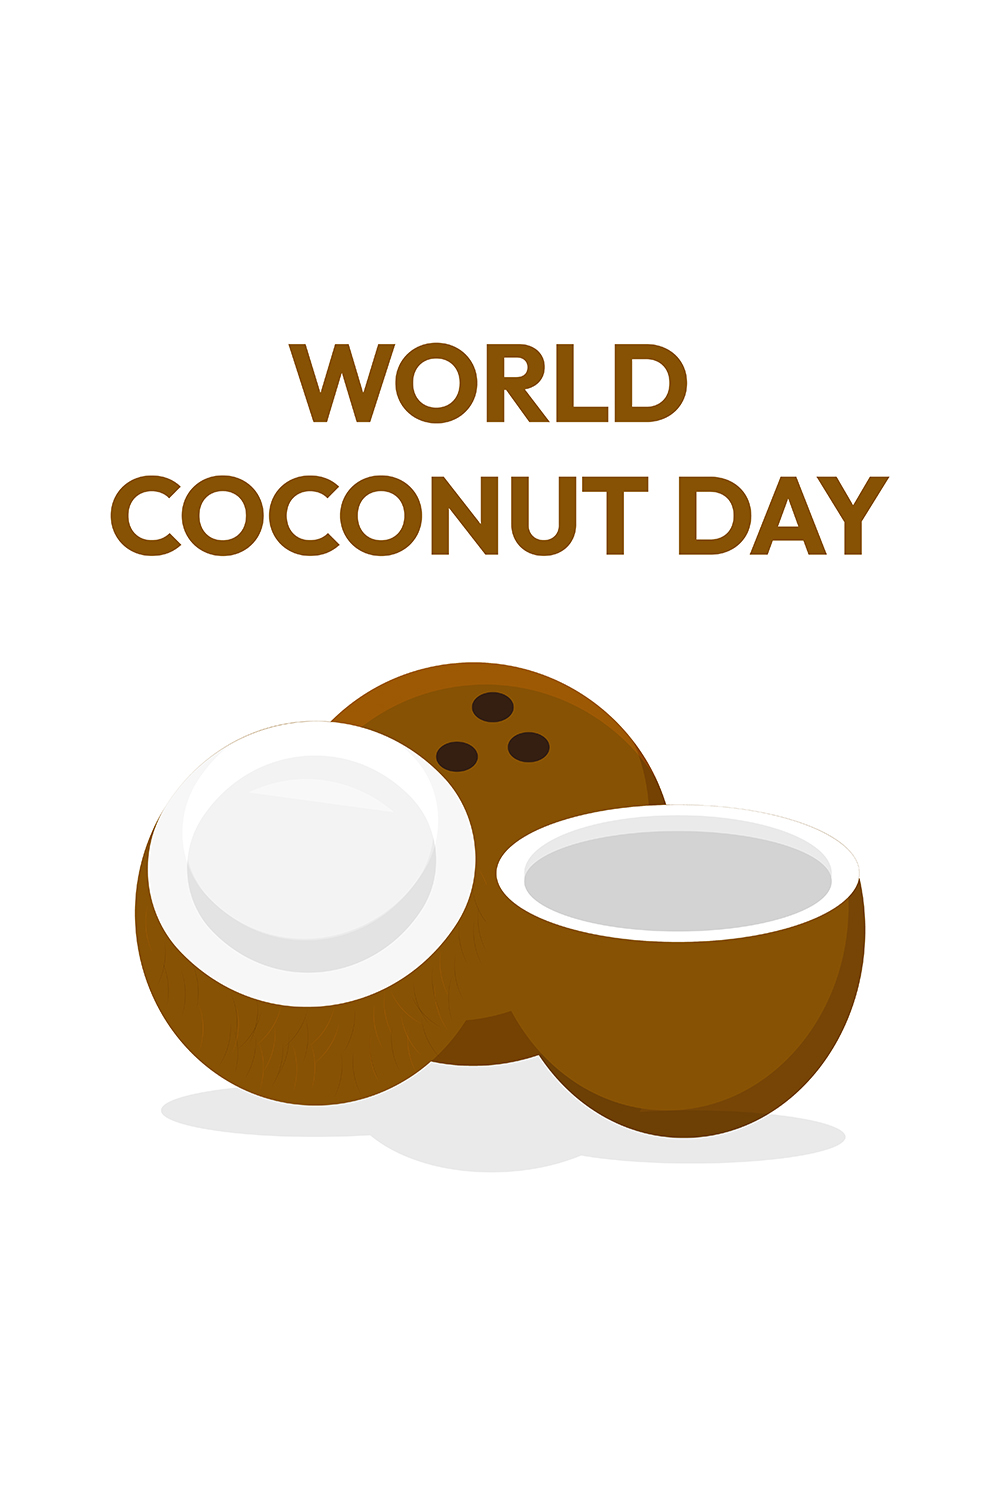 World coconut day design pinterest preview image.